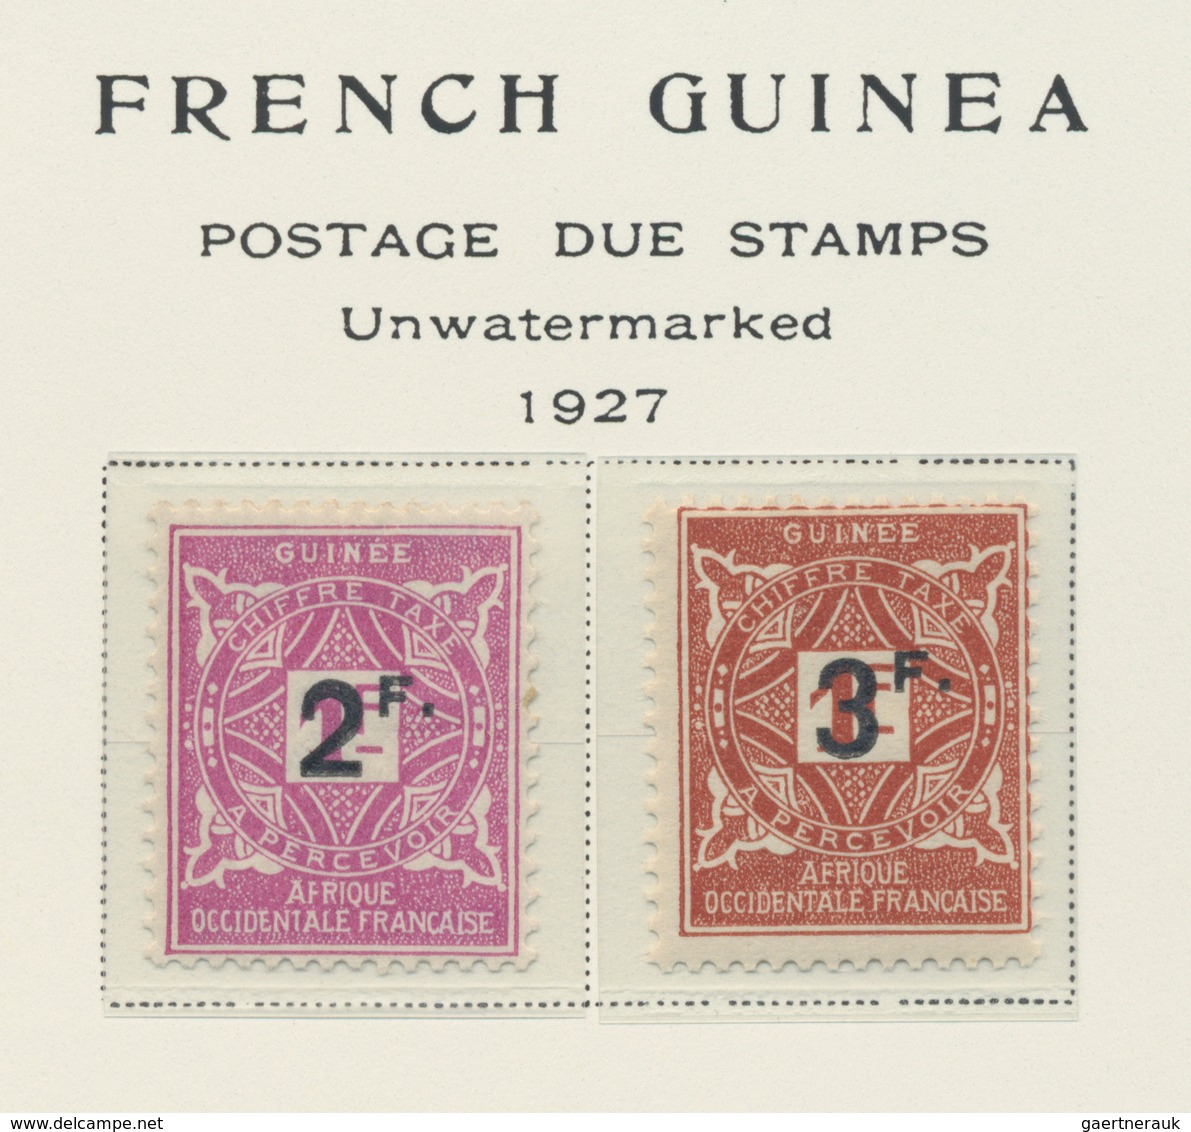 Französisch-Guinea: 1892/1927, obviously complete collection on old text form pages mint hinged and